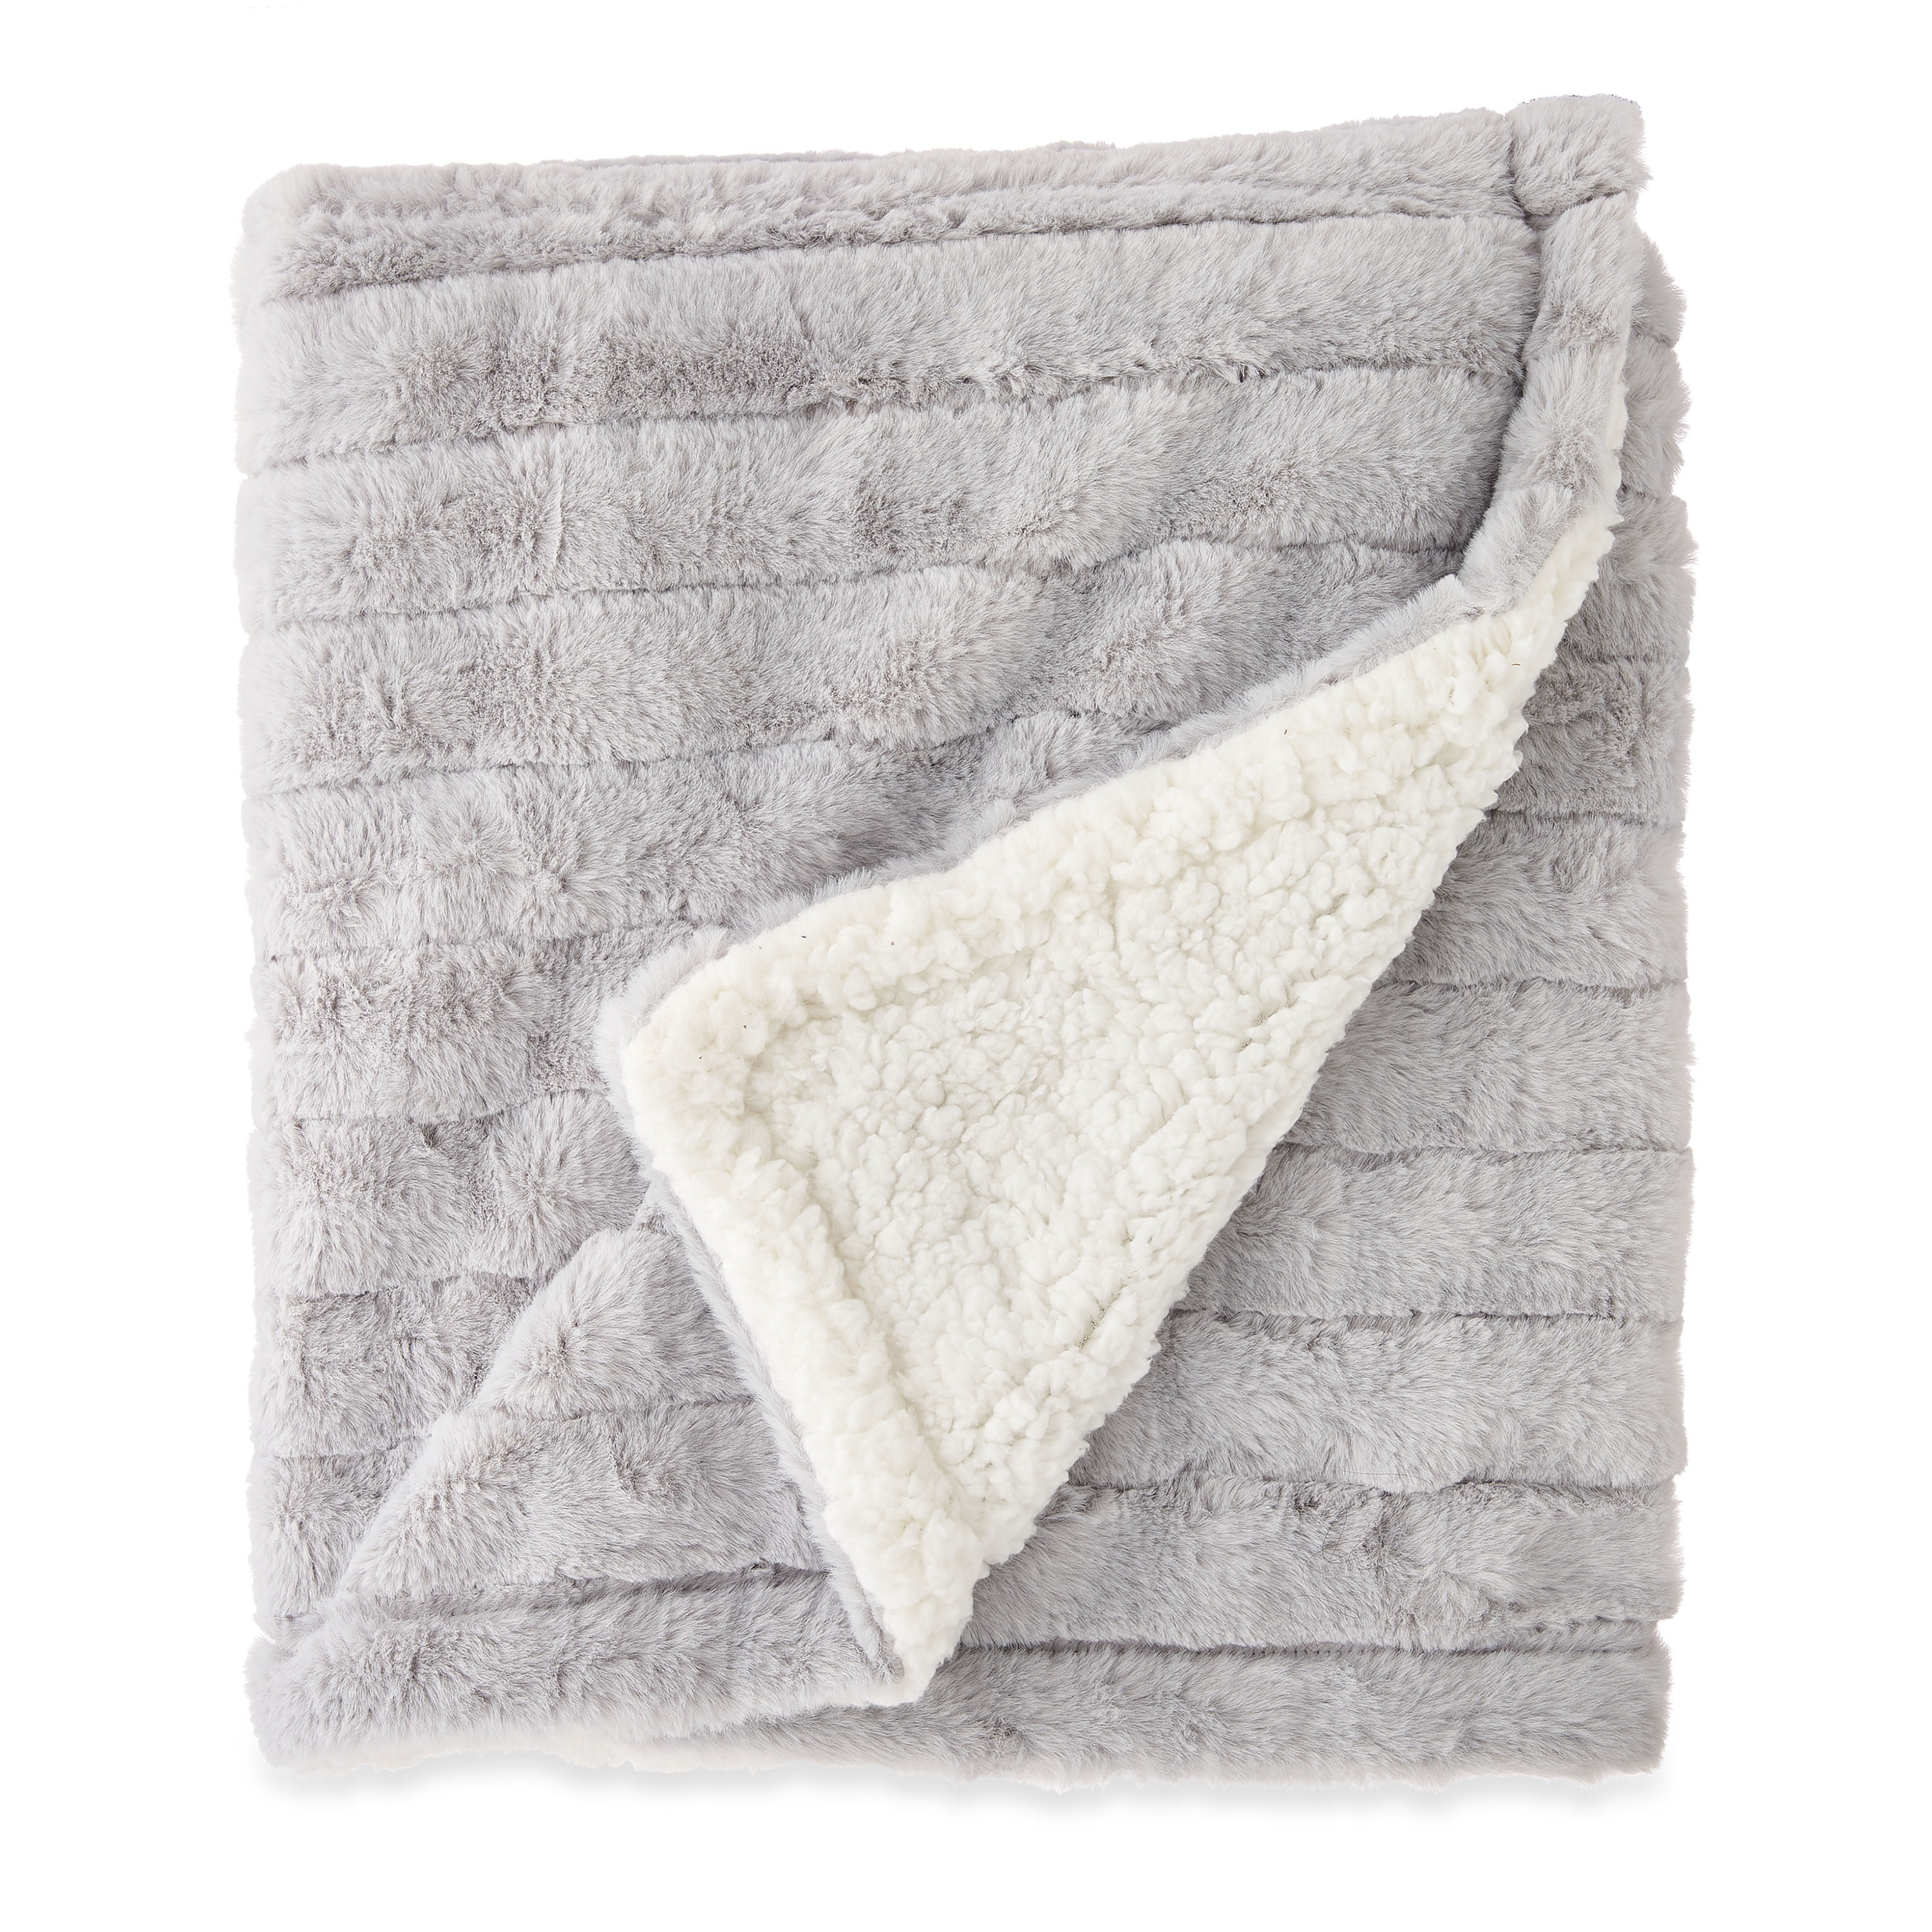 Parent's Choice Premium Plush Light Gray Blanket with Faux Sherpa Lining, for Baby or Toddler, 30" x 40"